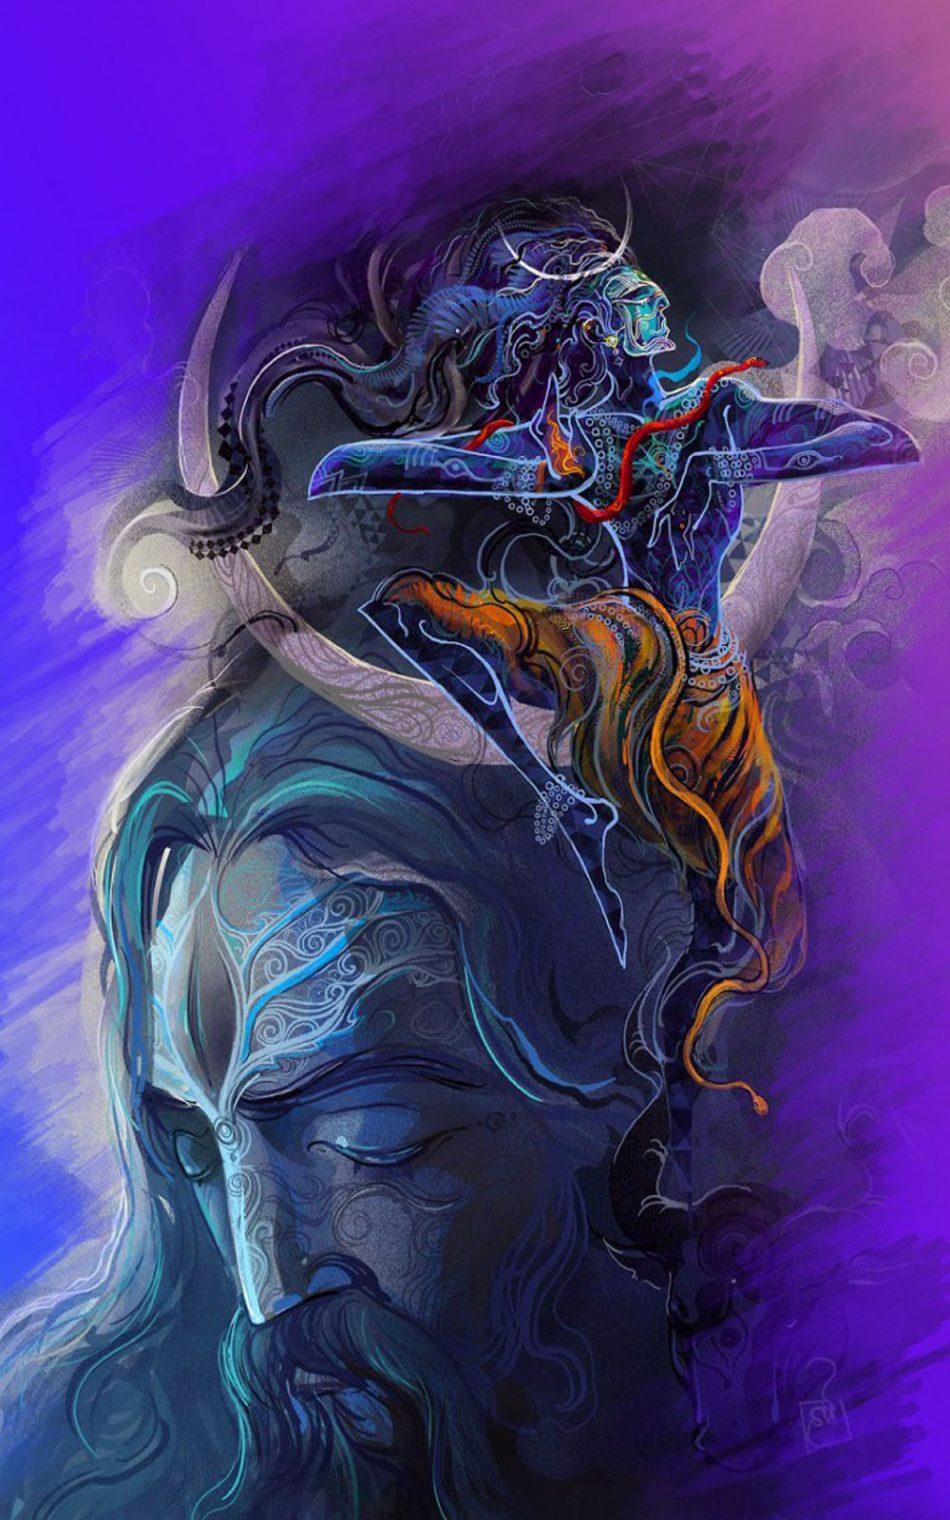  Lord Shiva iPhone Wallpapers Images HD  MyGodImages